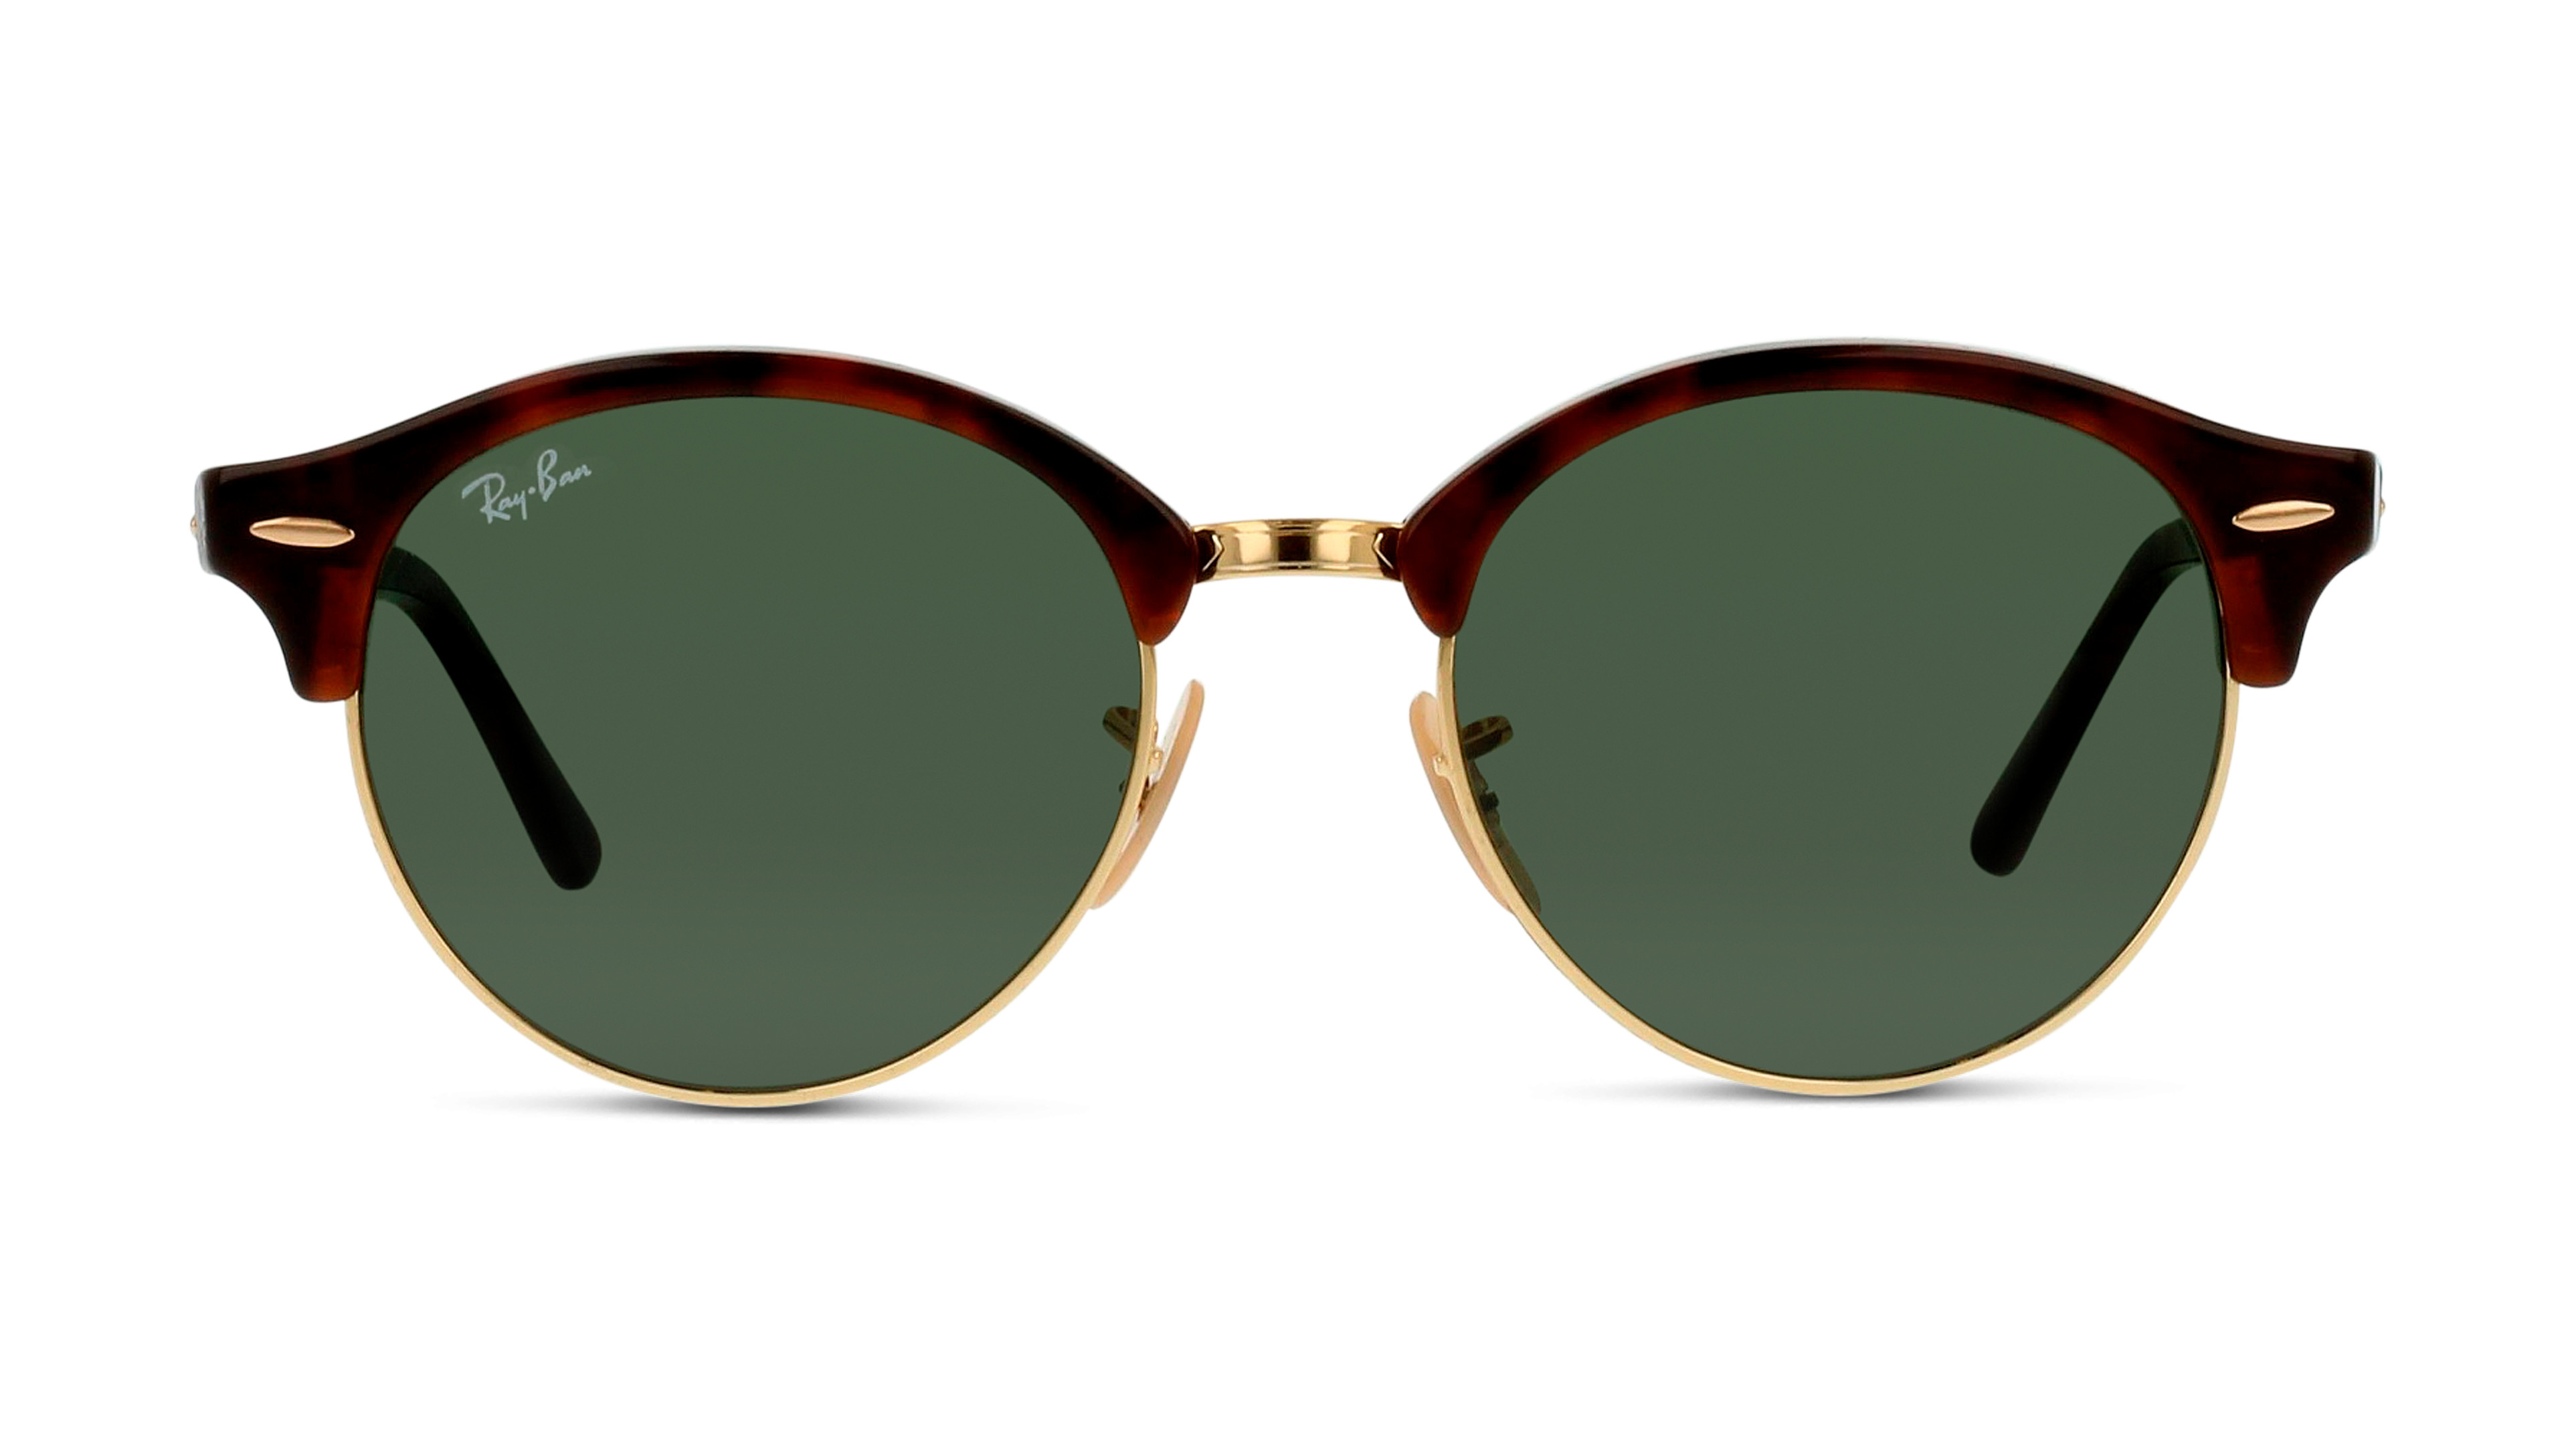 [products.image.front] Ray-Ban CLUBROUND 0RB4246 990 Sonnenbrille